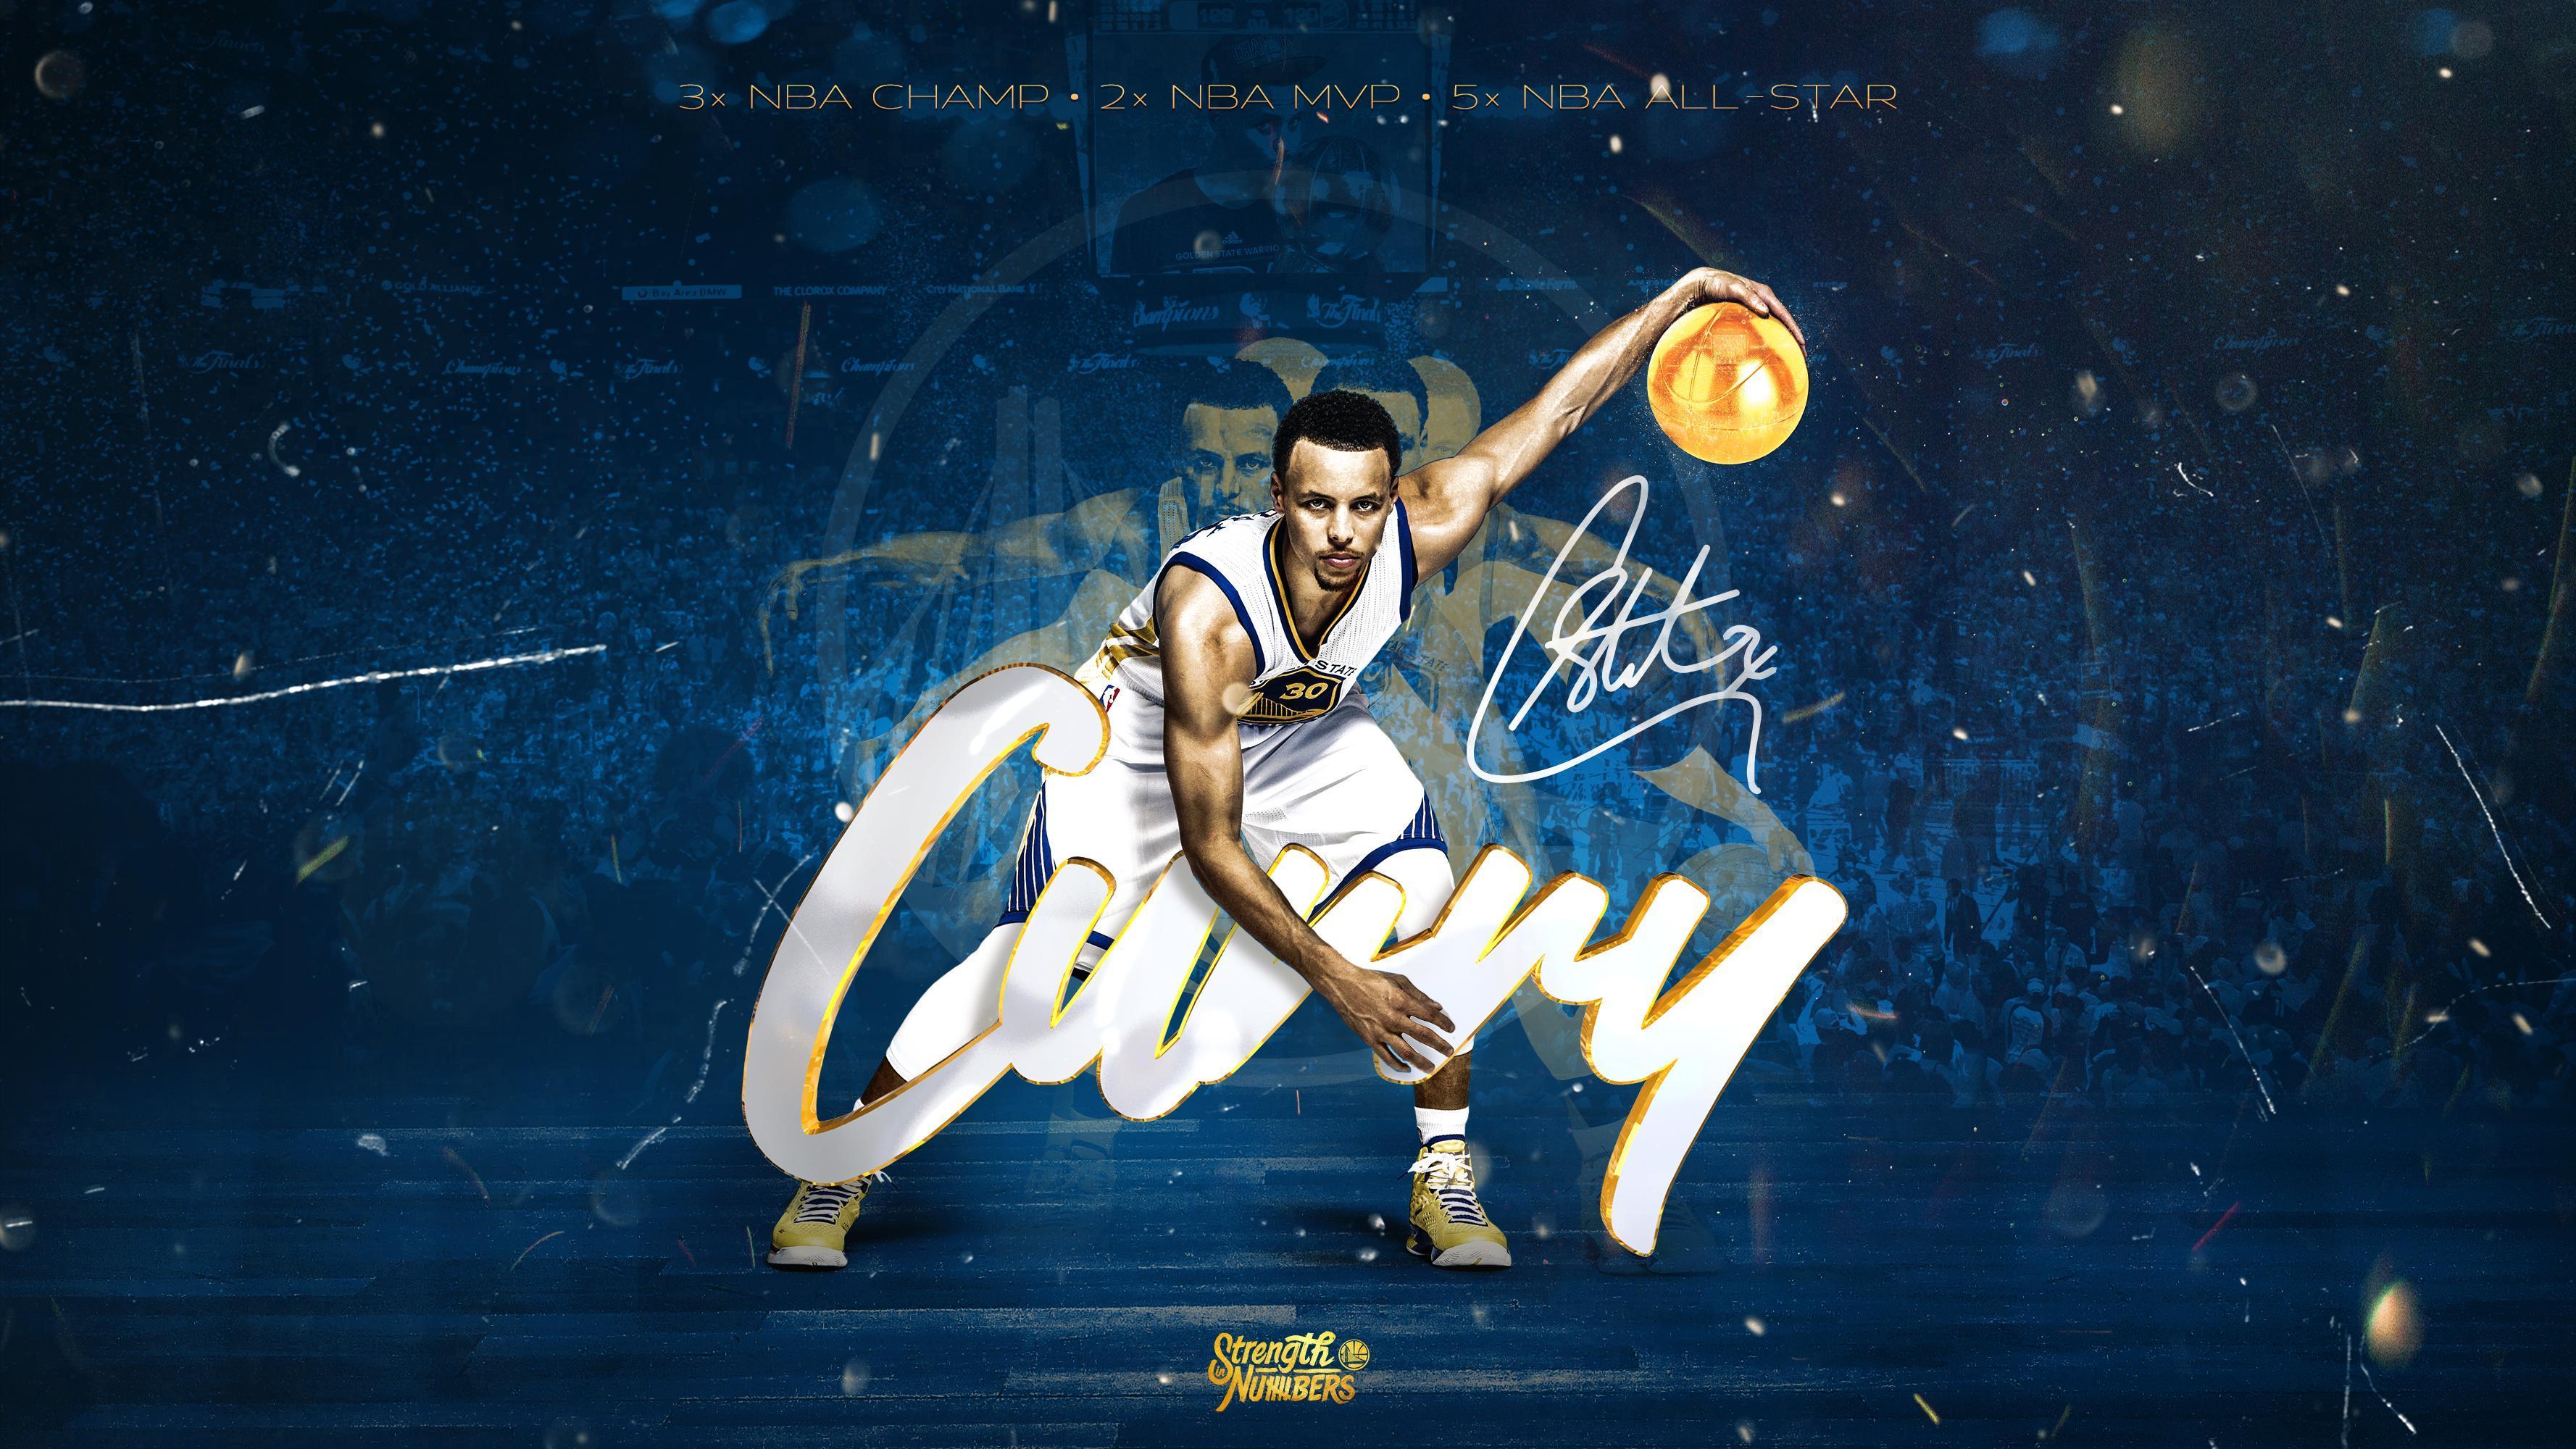 3555 x 2000 · jpeg - Stephen Curry 2019 Wallpapers - Wallpaper Cave